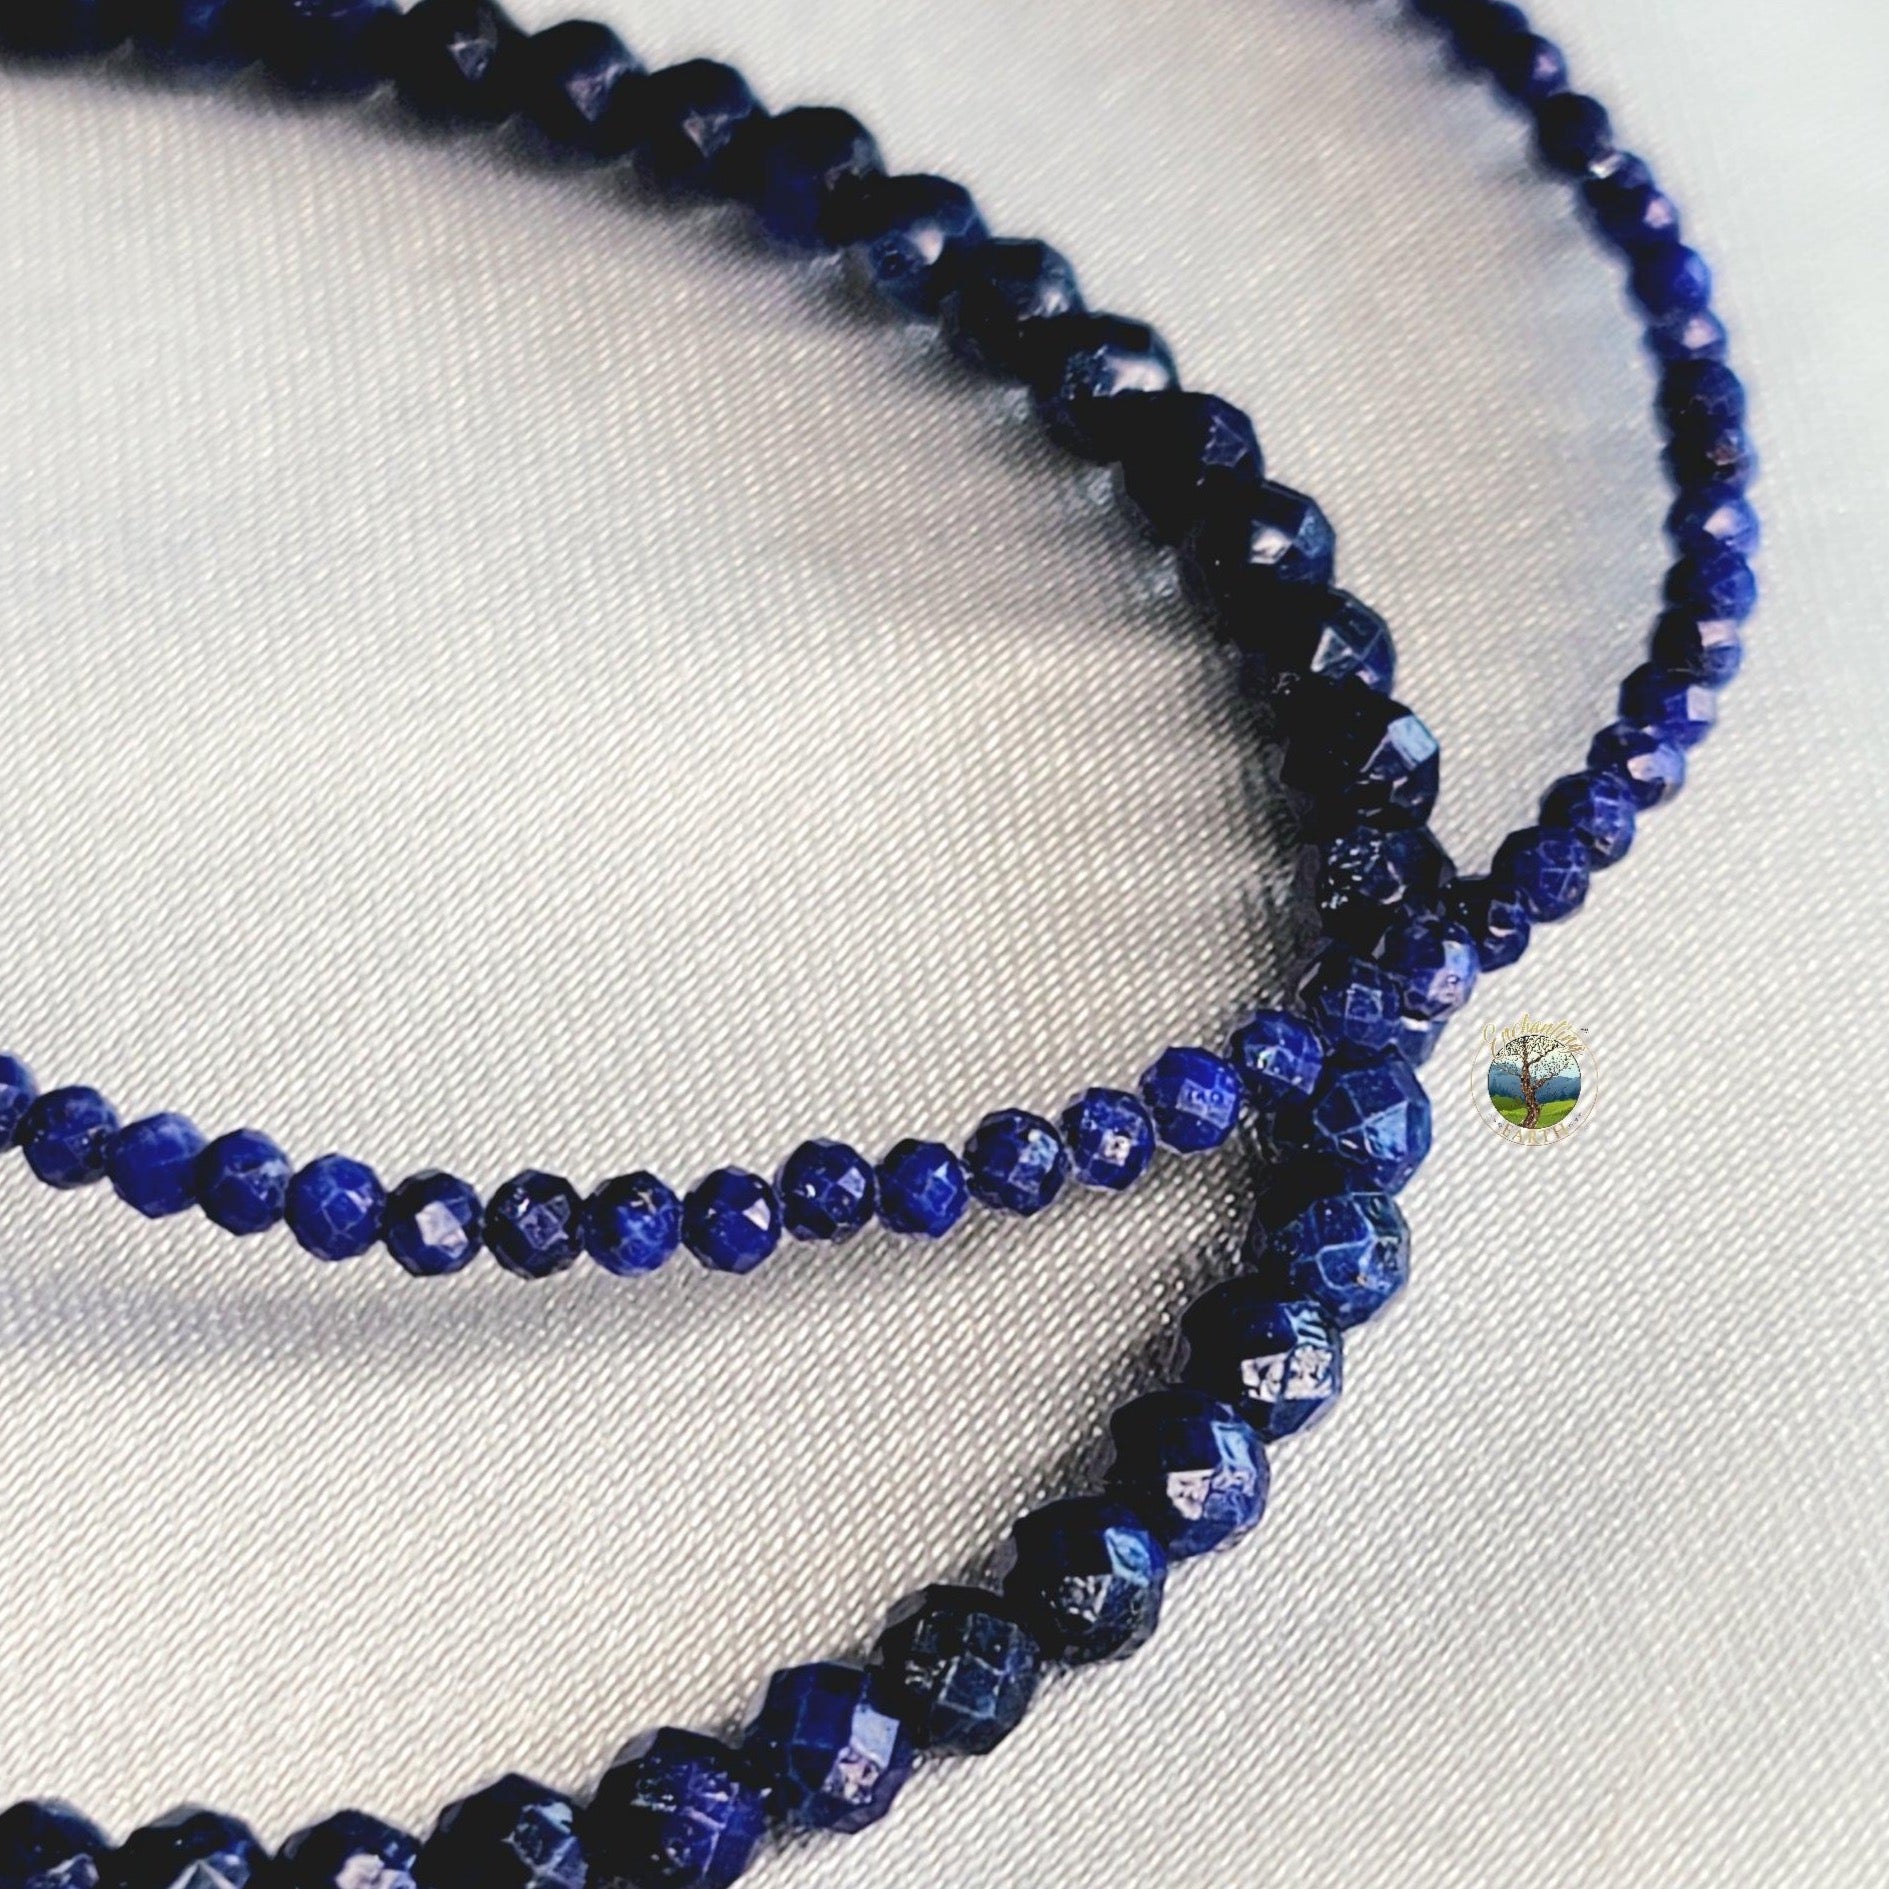 Lapis Lazuli Micro Faceted Bracelet for Confidence, Intuition and Power